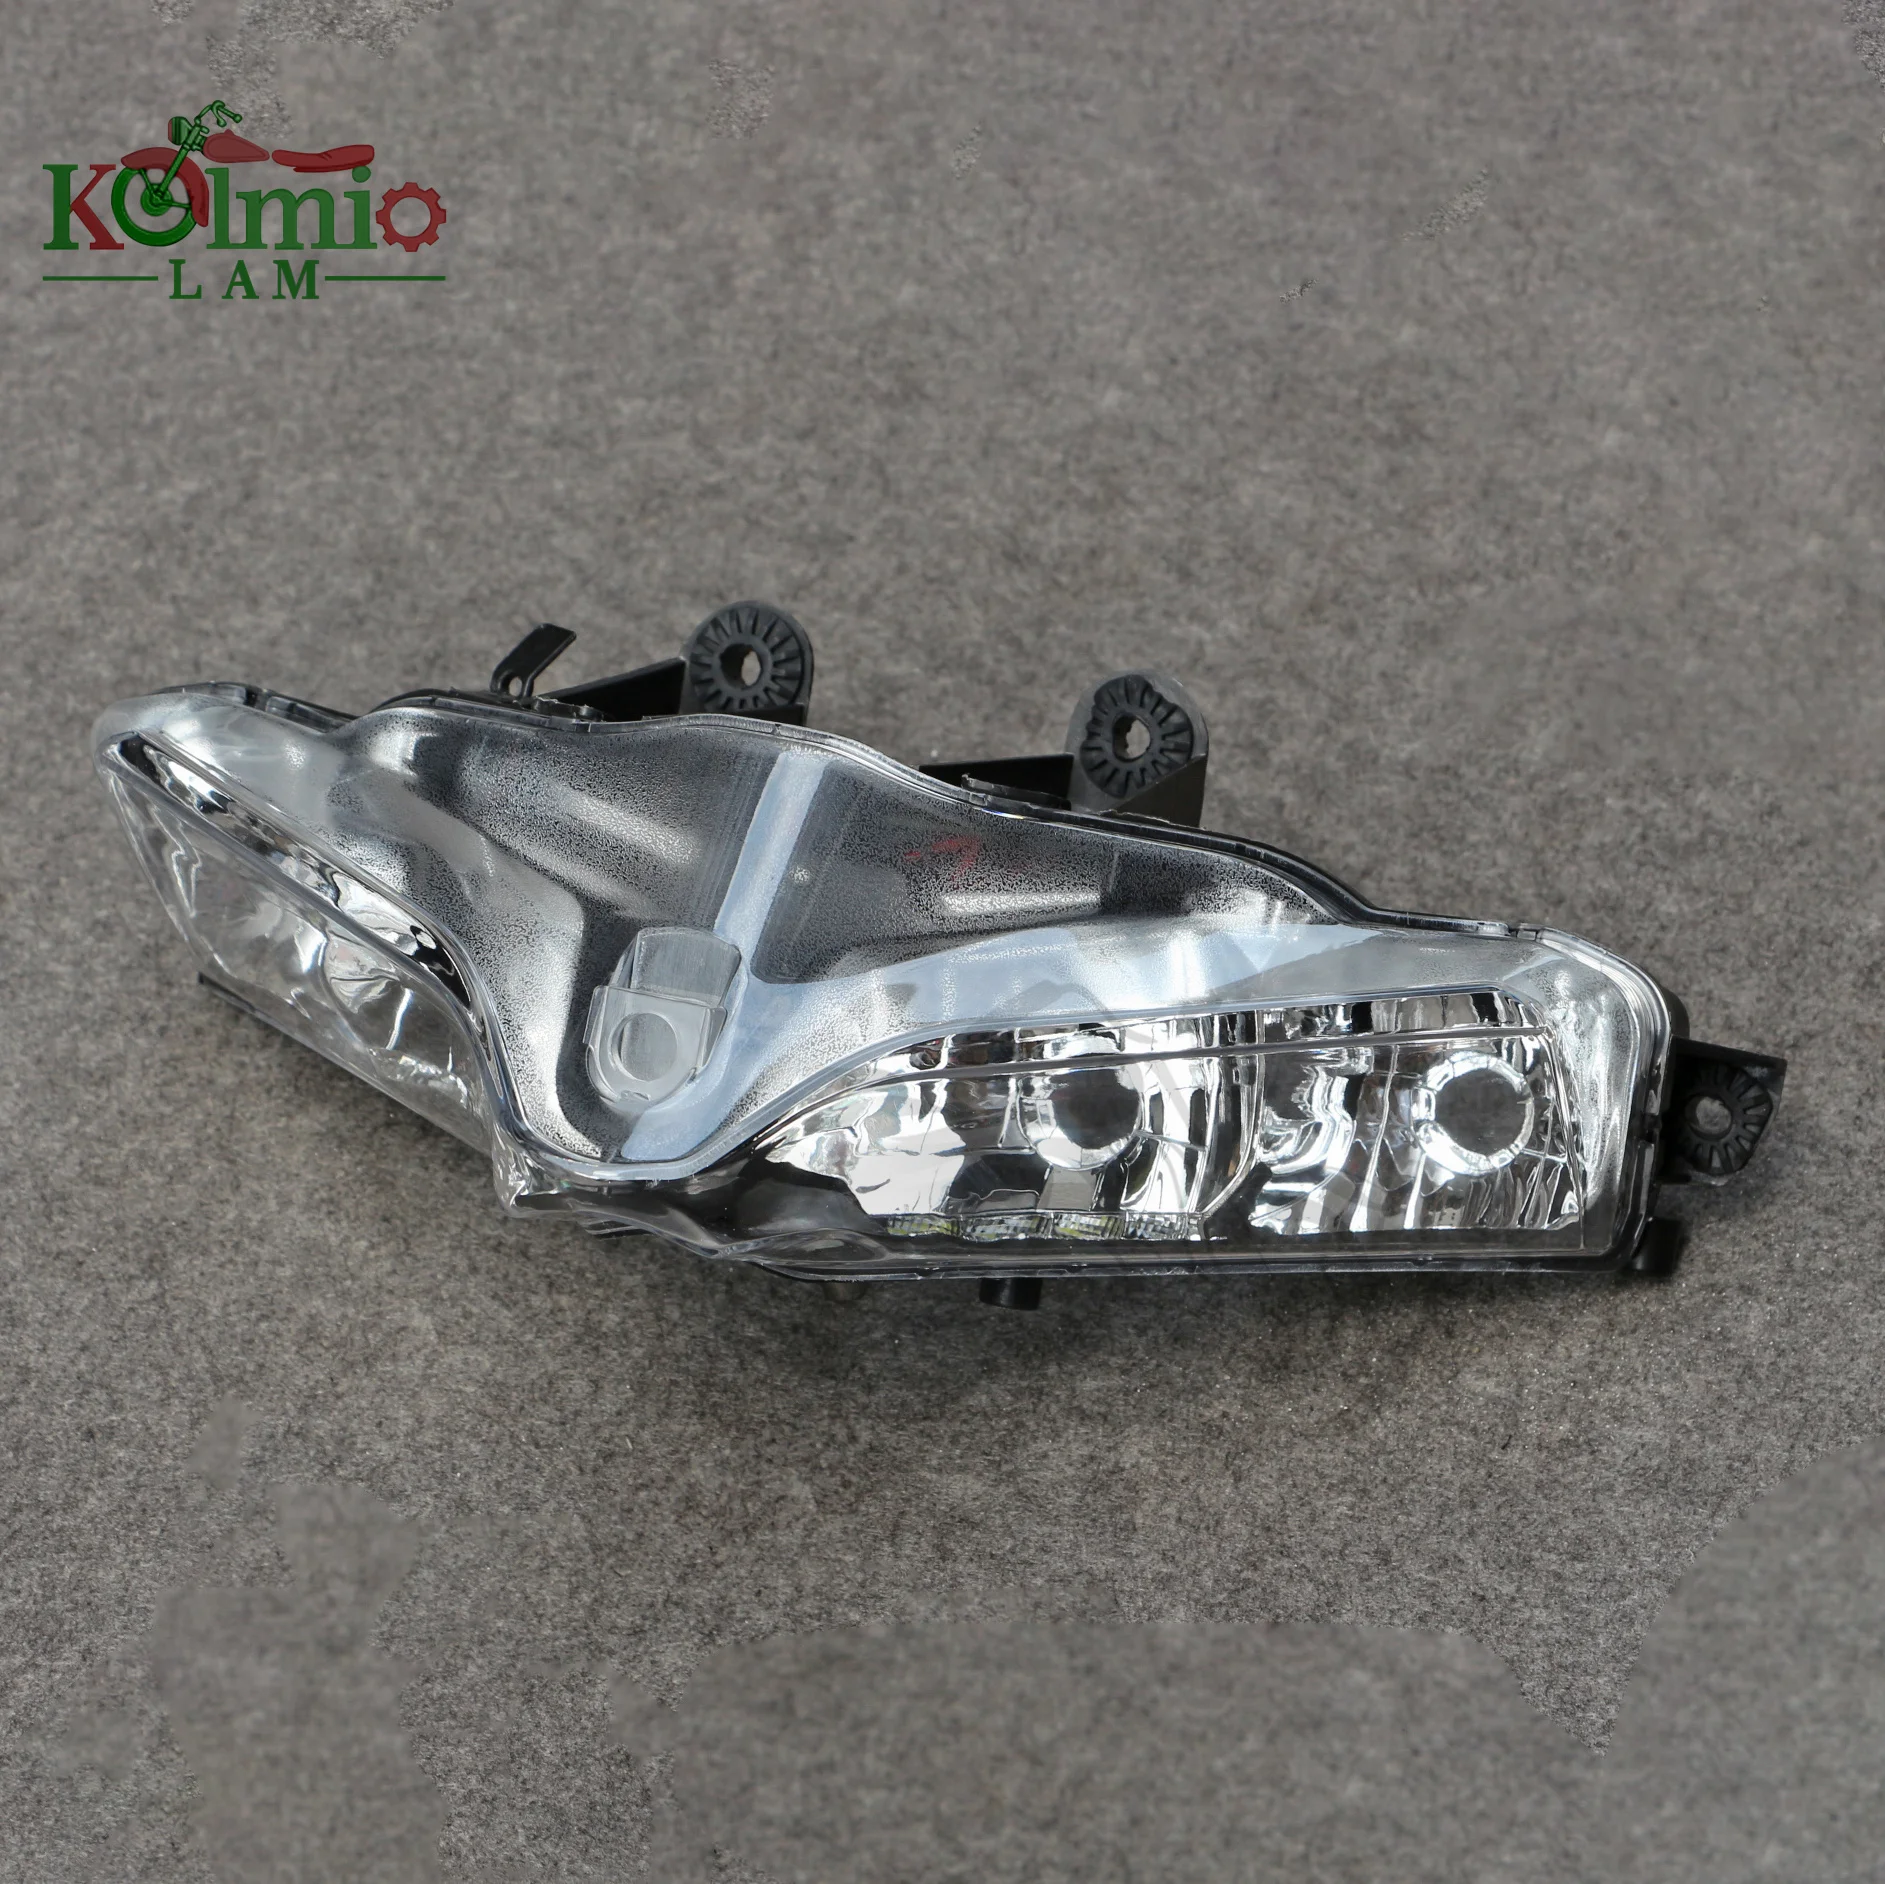 

Motorcycle Headlight Assembly Headlamp Fit for DUCATI Panigale 1199 899 1199S R 2012 2013 2014 2015 2016 2017 Head light